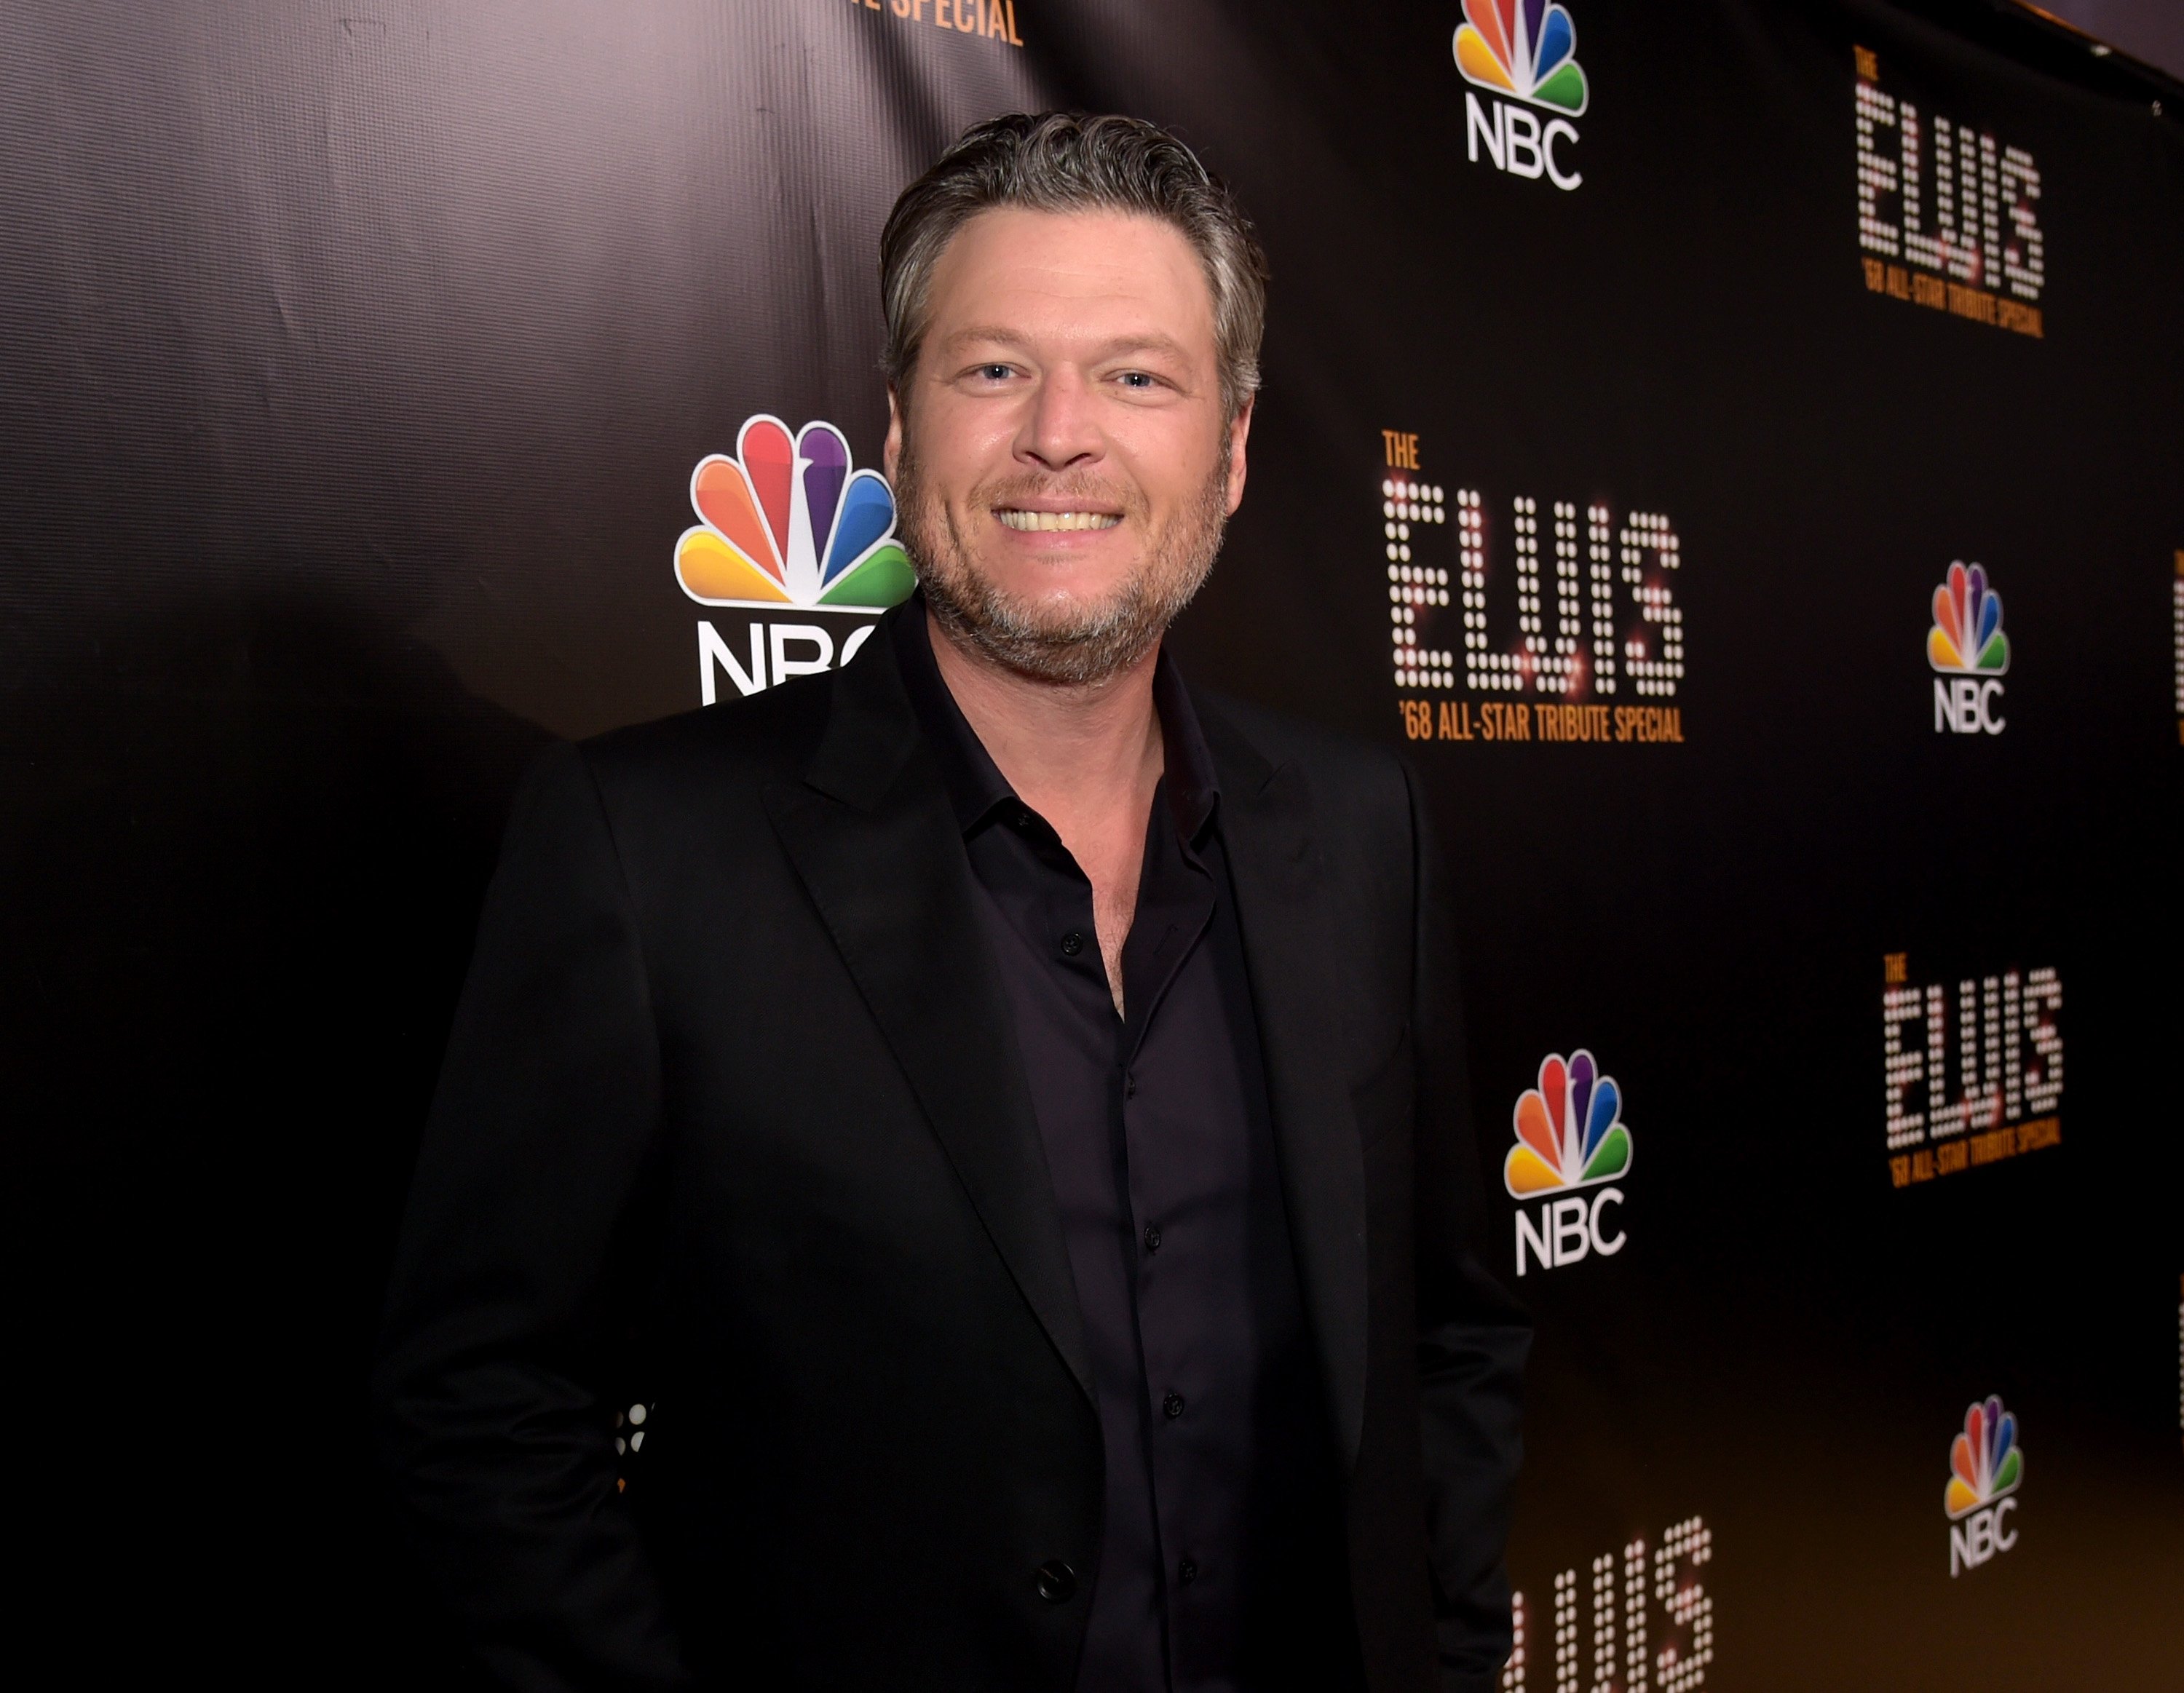 Blake Shelton appears backstage during The Elvis '68 All-Star Tribute Special at Universal Studios on October 11, 2018, in Universal City, California. | Source: Getty Images.